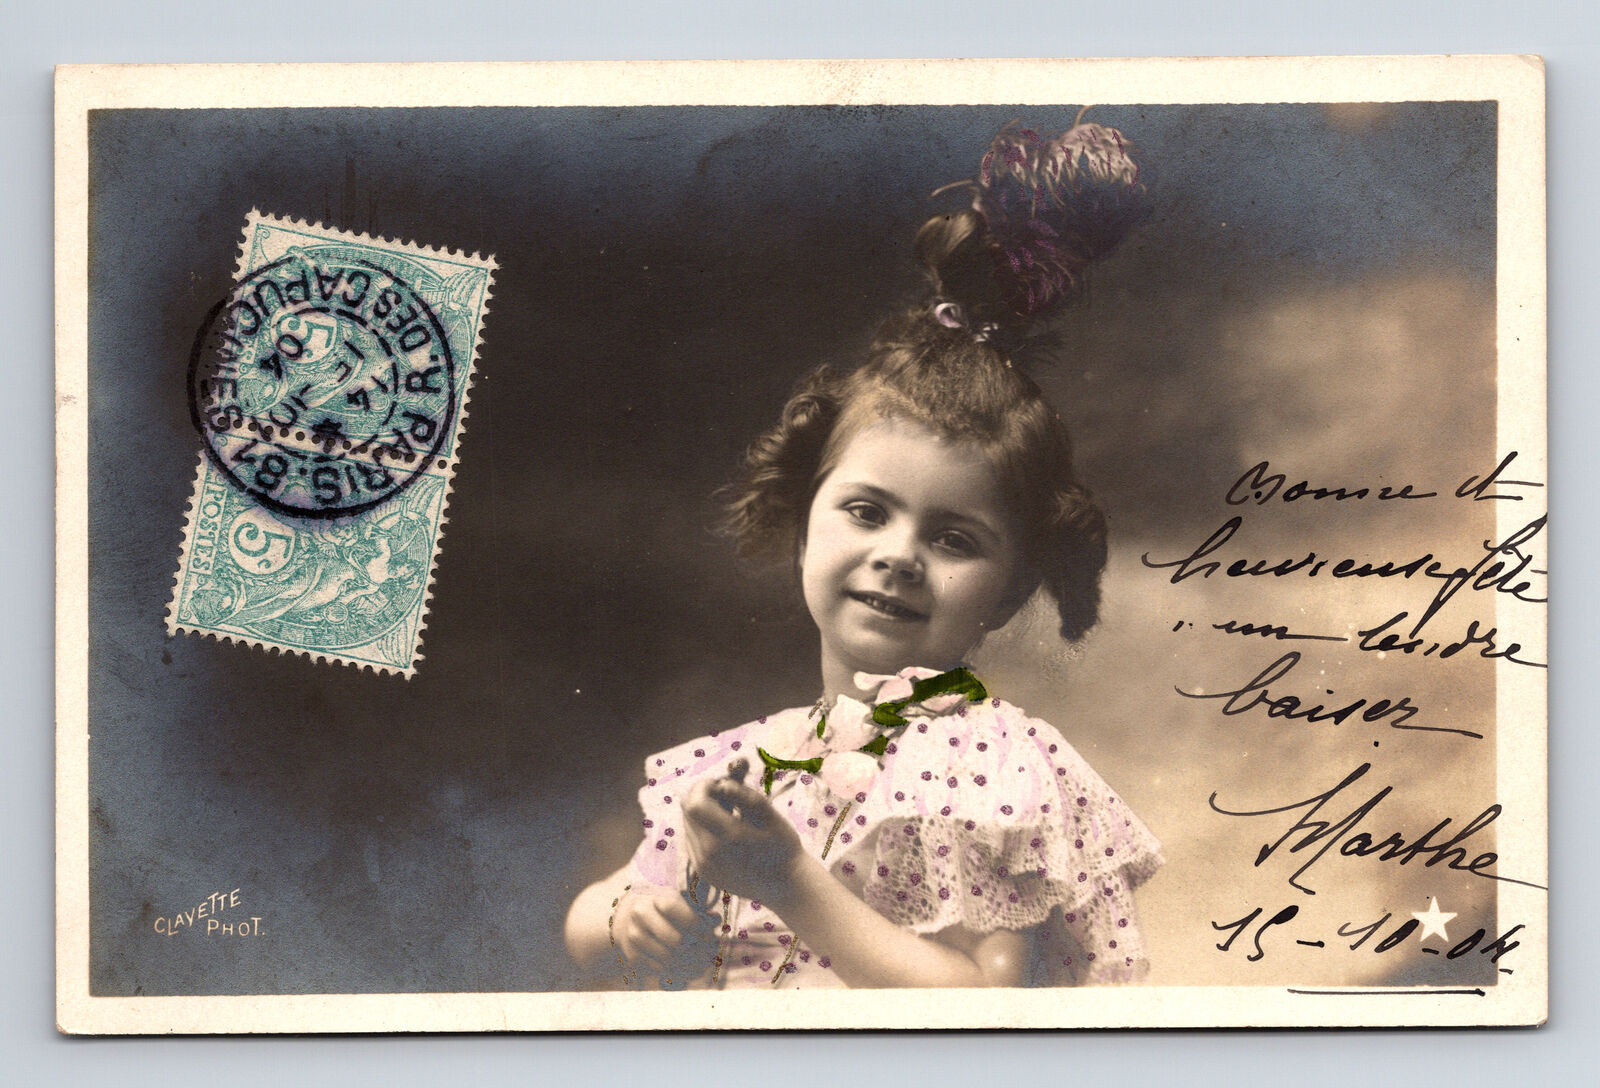 c1904 RPPC Portrait Young French Girl Crazy Hair Clavette Hand Colored Postcard